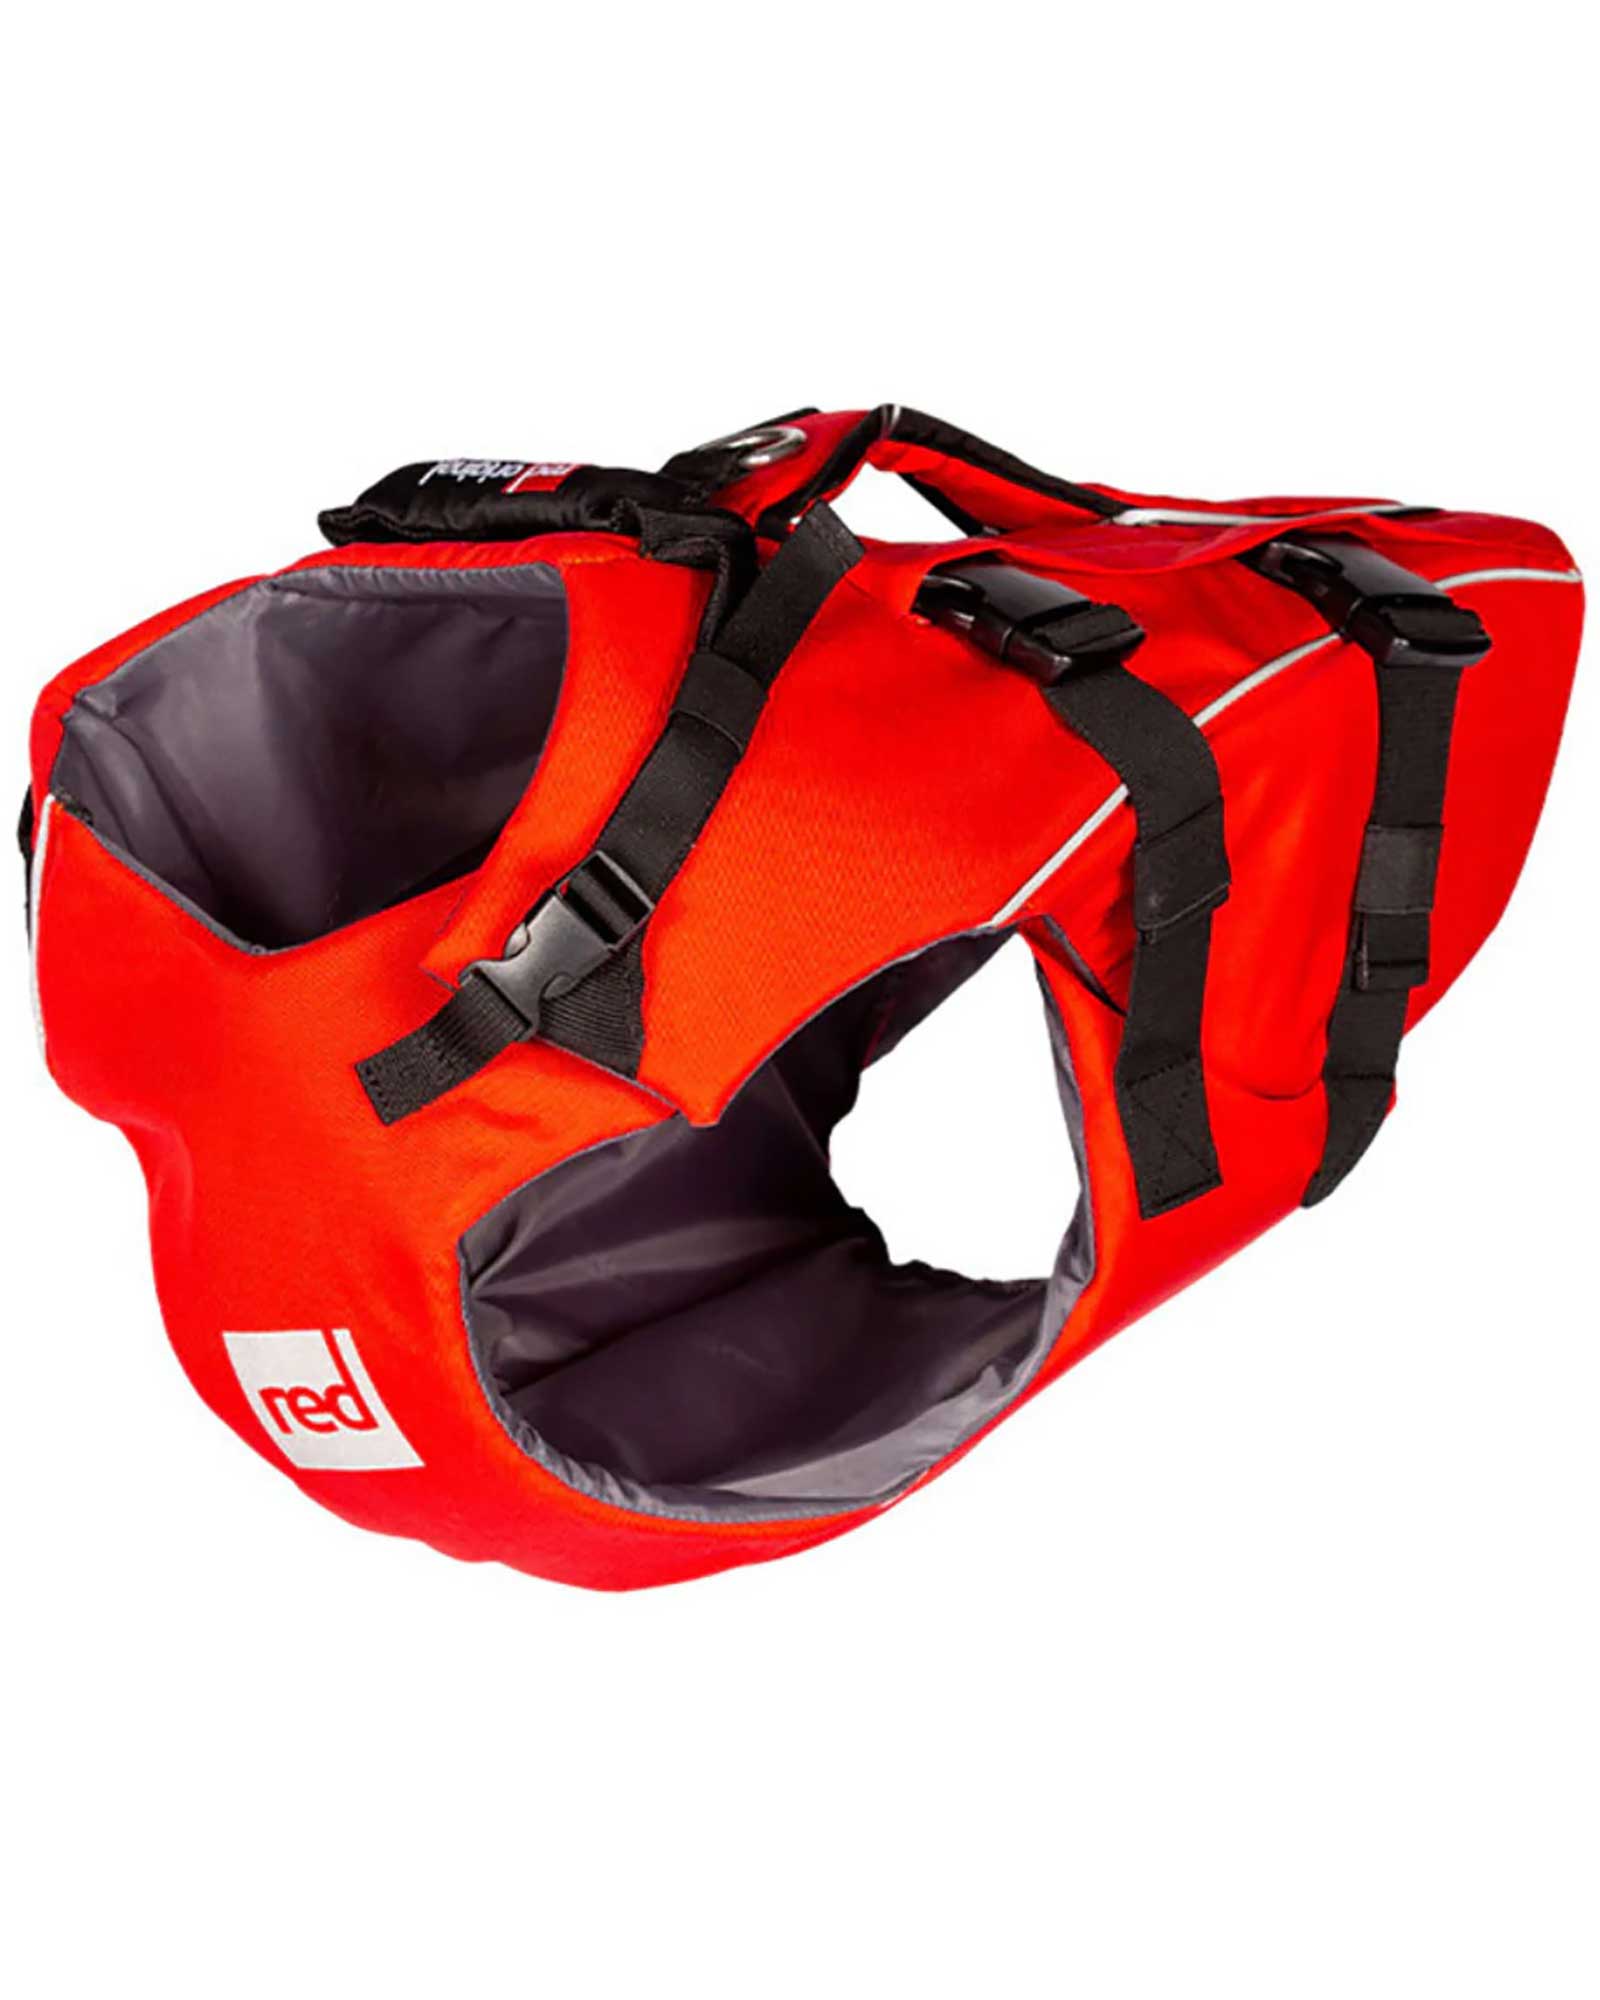 Red Dog PFD   Large - Red